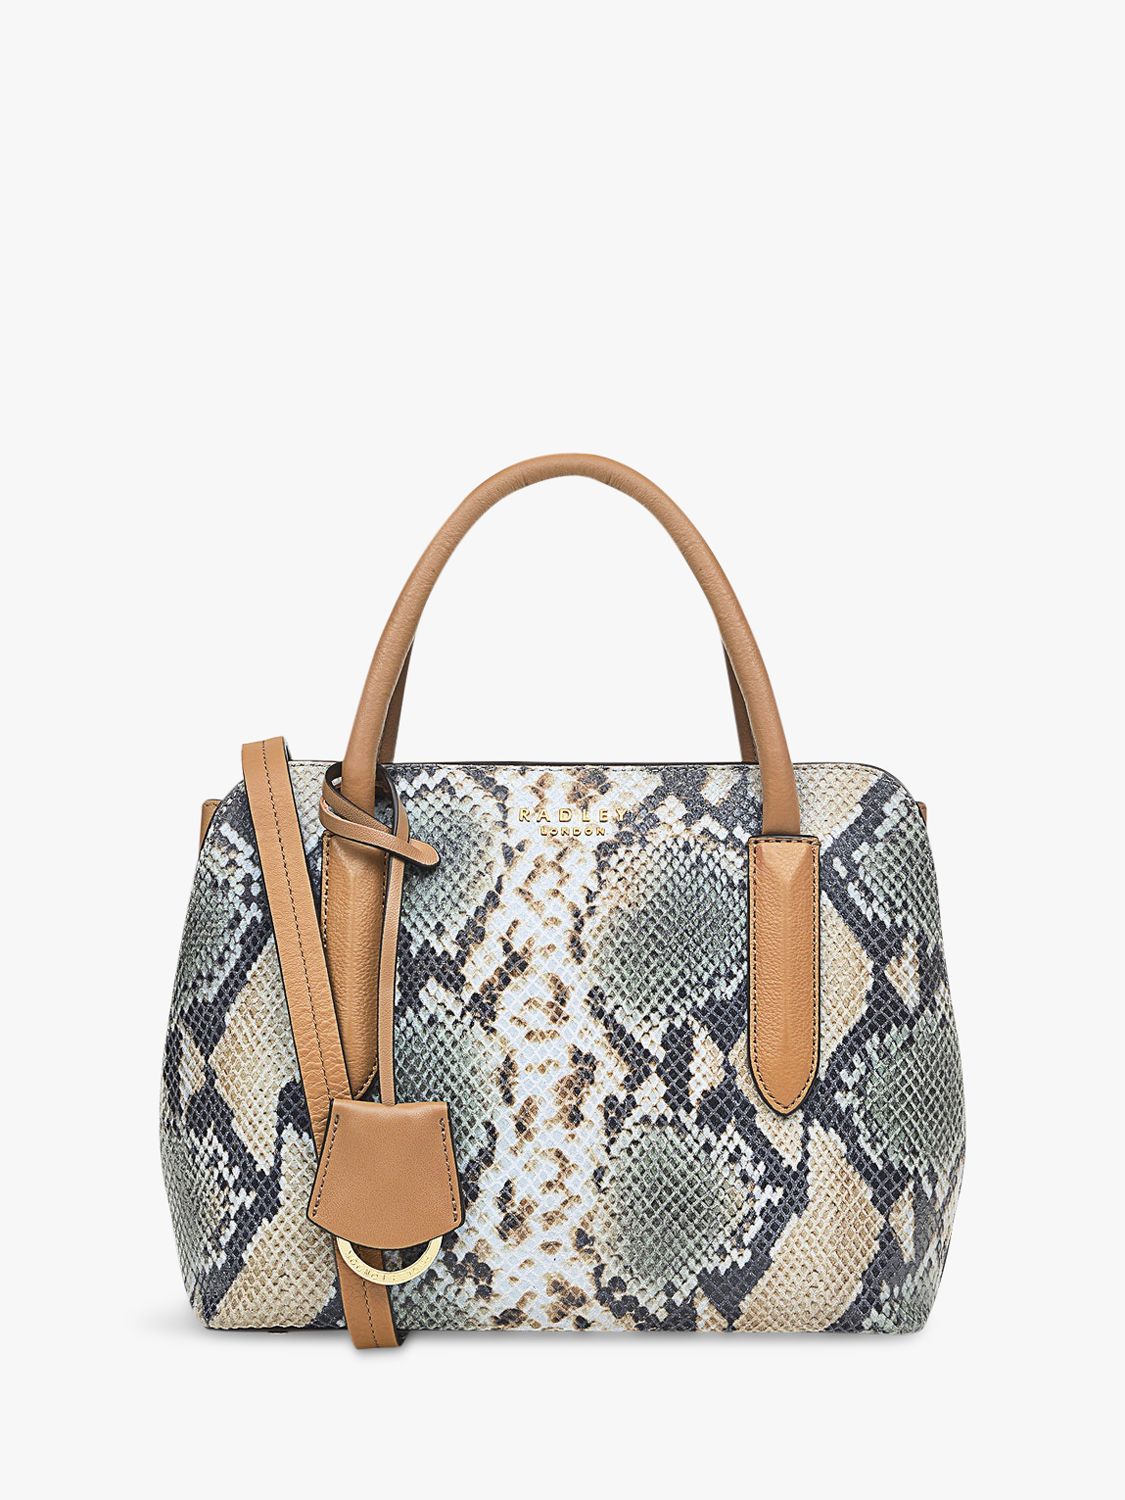 Radley Liverpool Street 2.0 Leather Small Multiway Bag, Butterscotch/Snake  at John Lewis & Partners